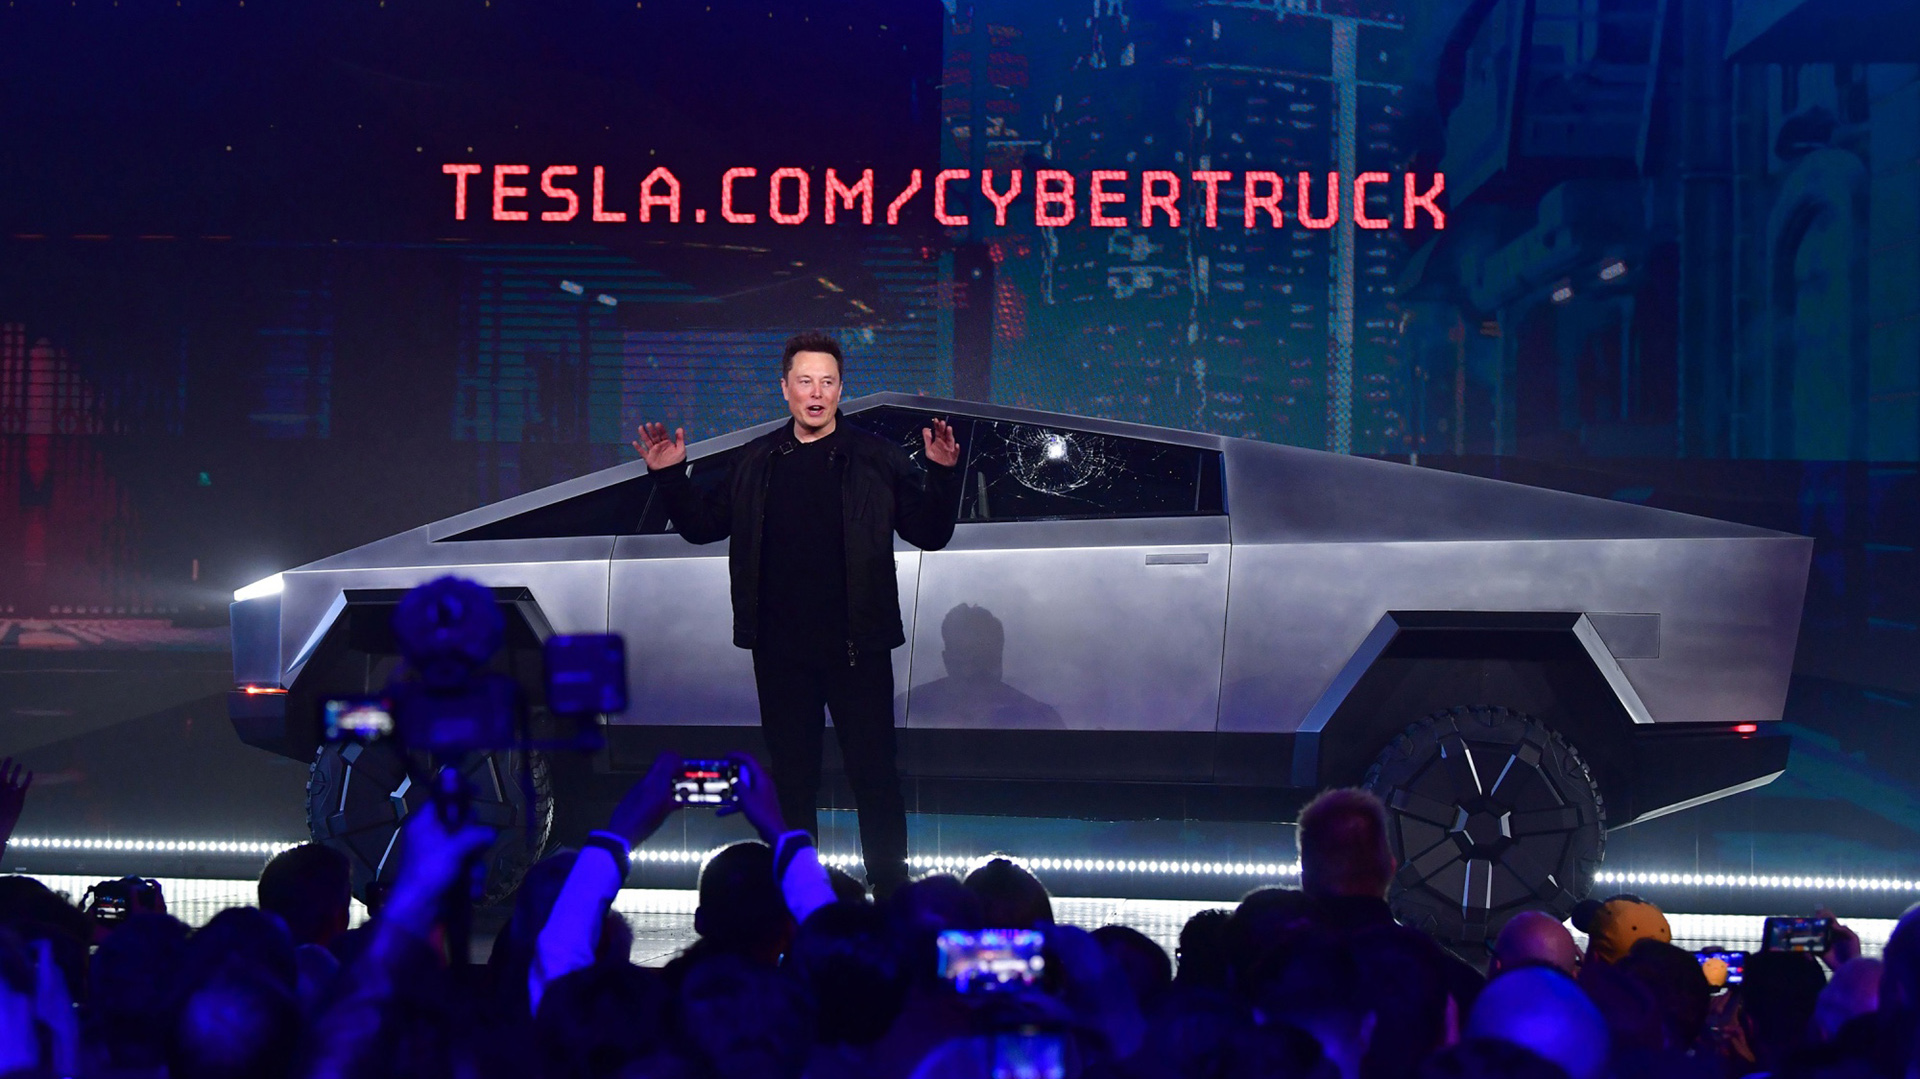 Elon Musk assures that the Cybertruck can be used to move on the water as a boat.